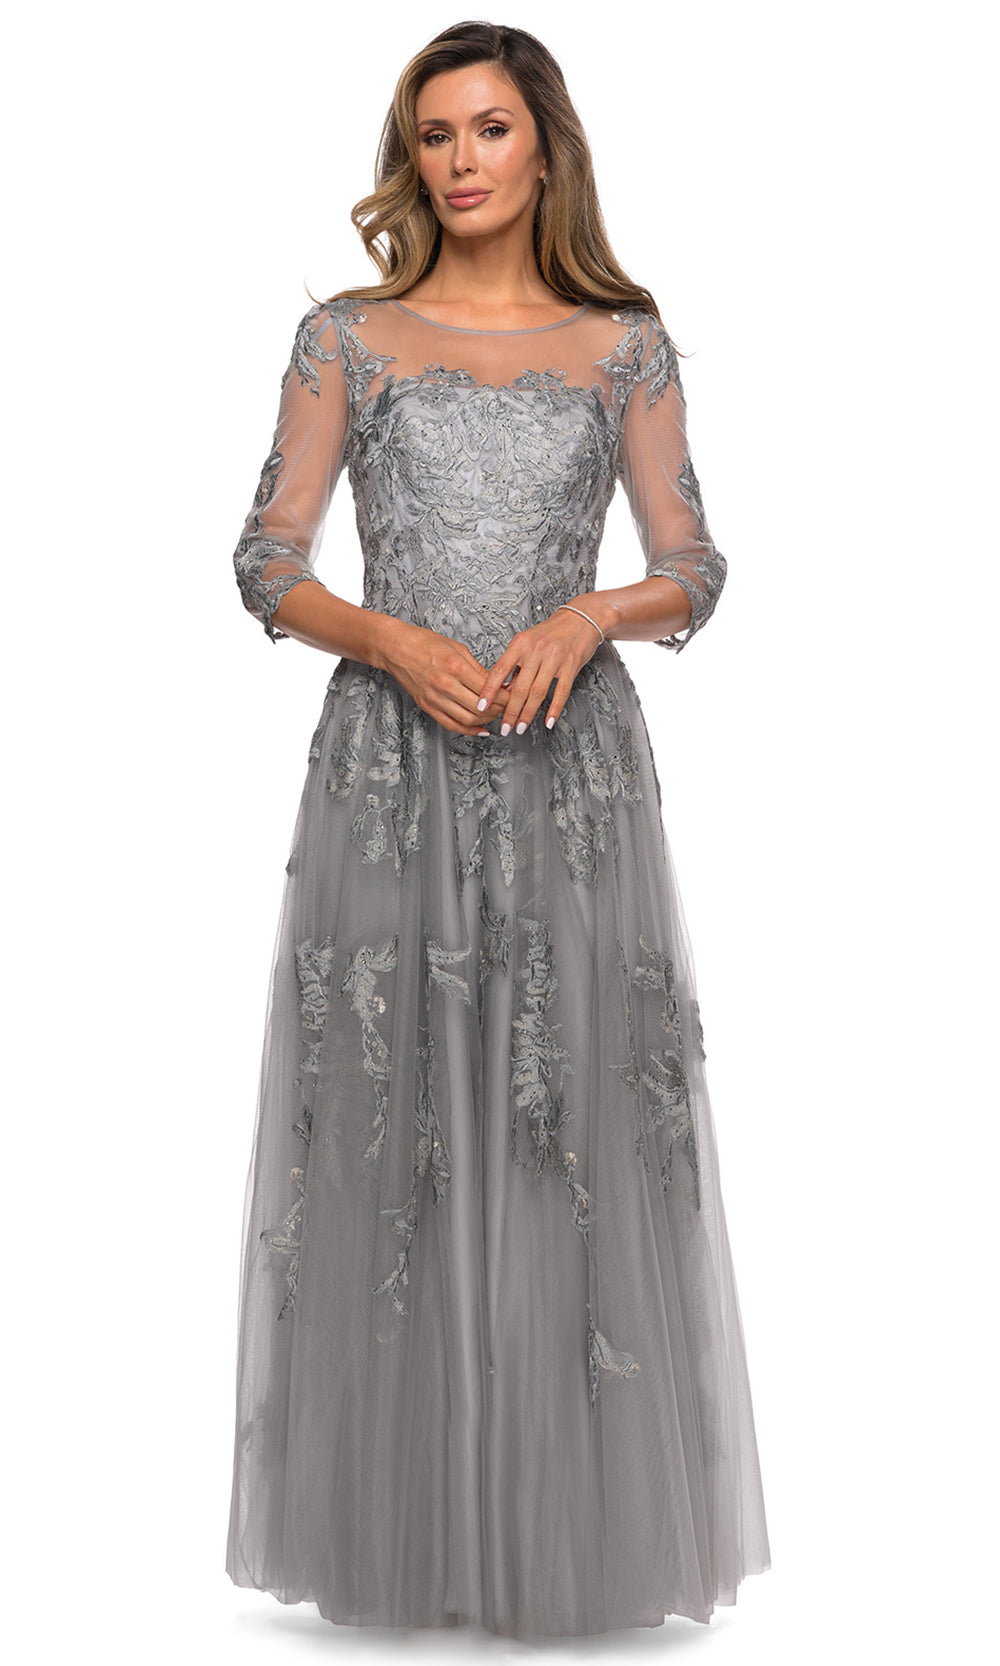 La Femme - 27944 Floral Lace A-Line Evening Dress In Silver and Gray